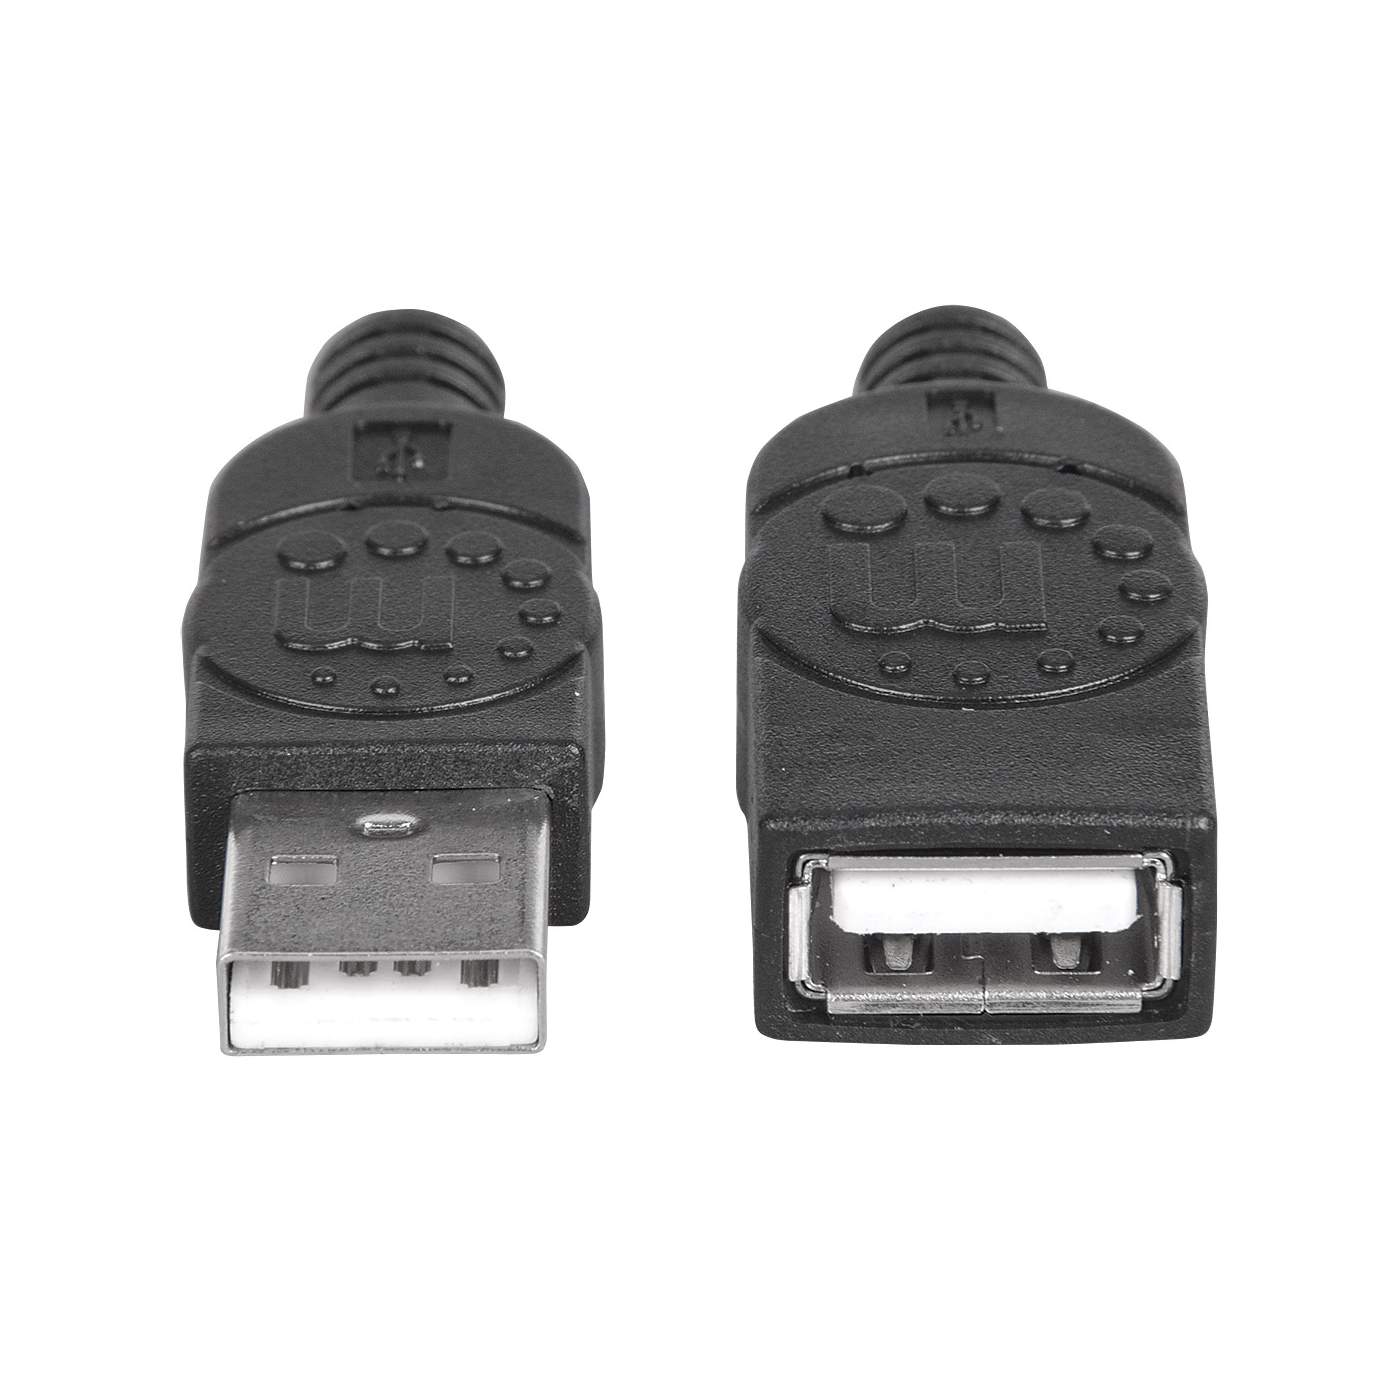 Hi-Speed USB 2.0 Extension Cable Image 4